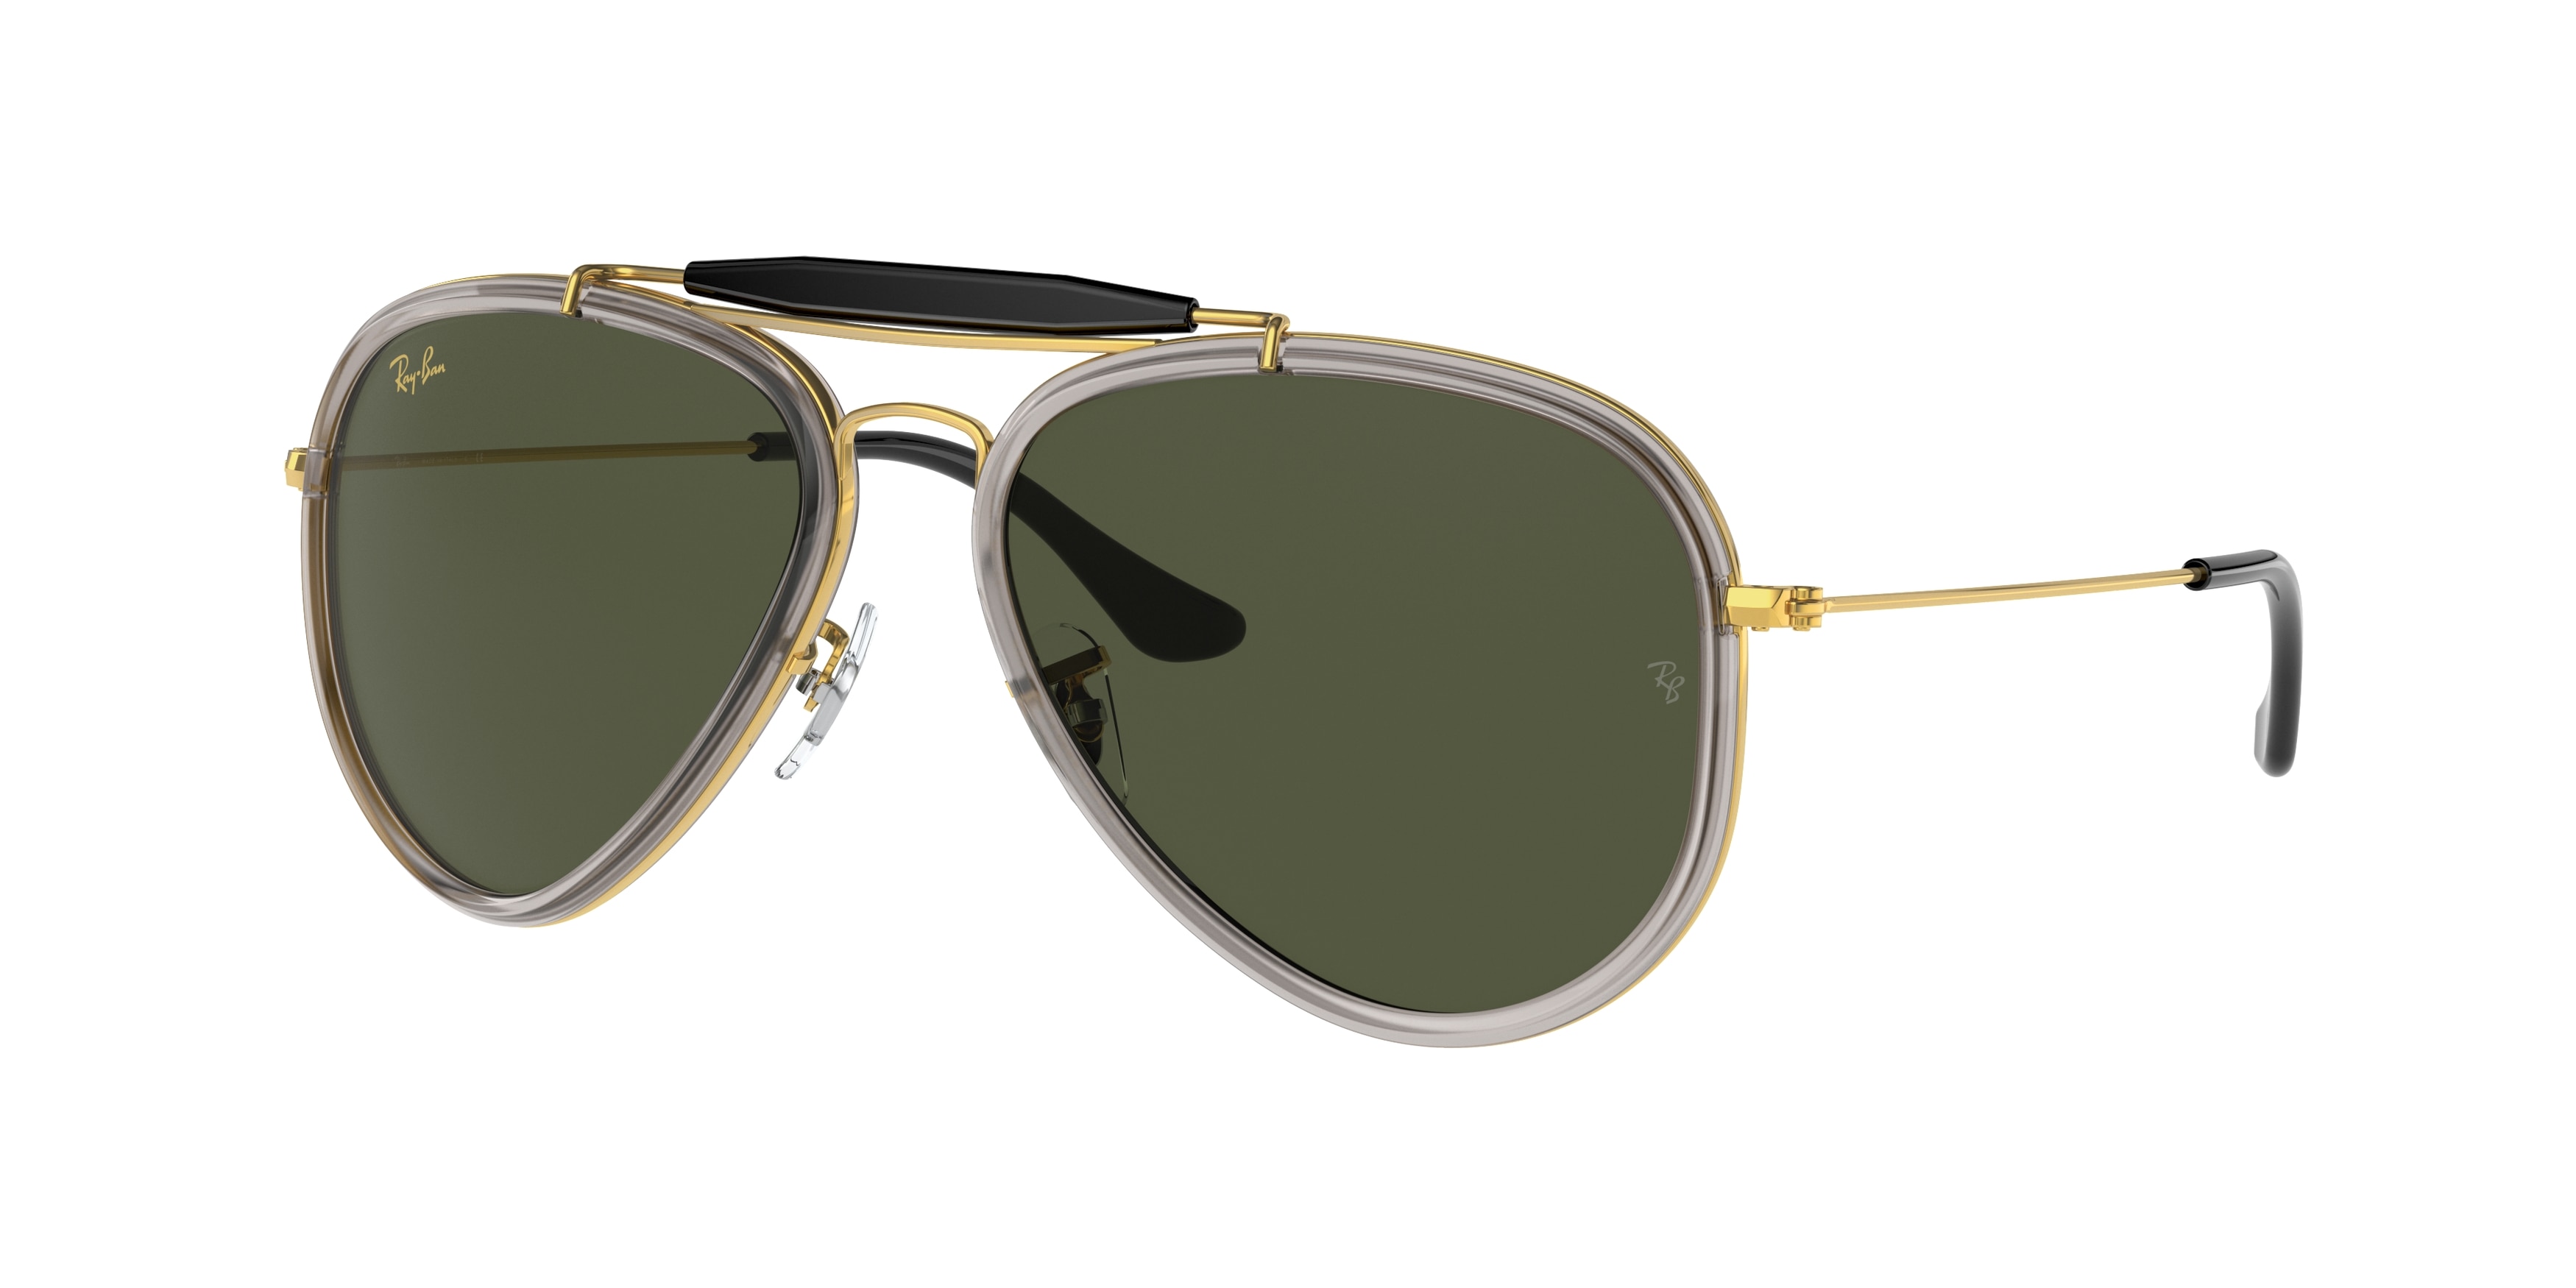 Ray-Ban RB 3428 ROAD SPIRIT Discontinued 8155 Sunglasses | Ray-Ban  Sunglasses | Designer Sunglasses